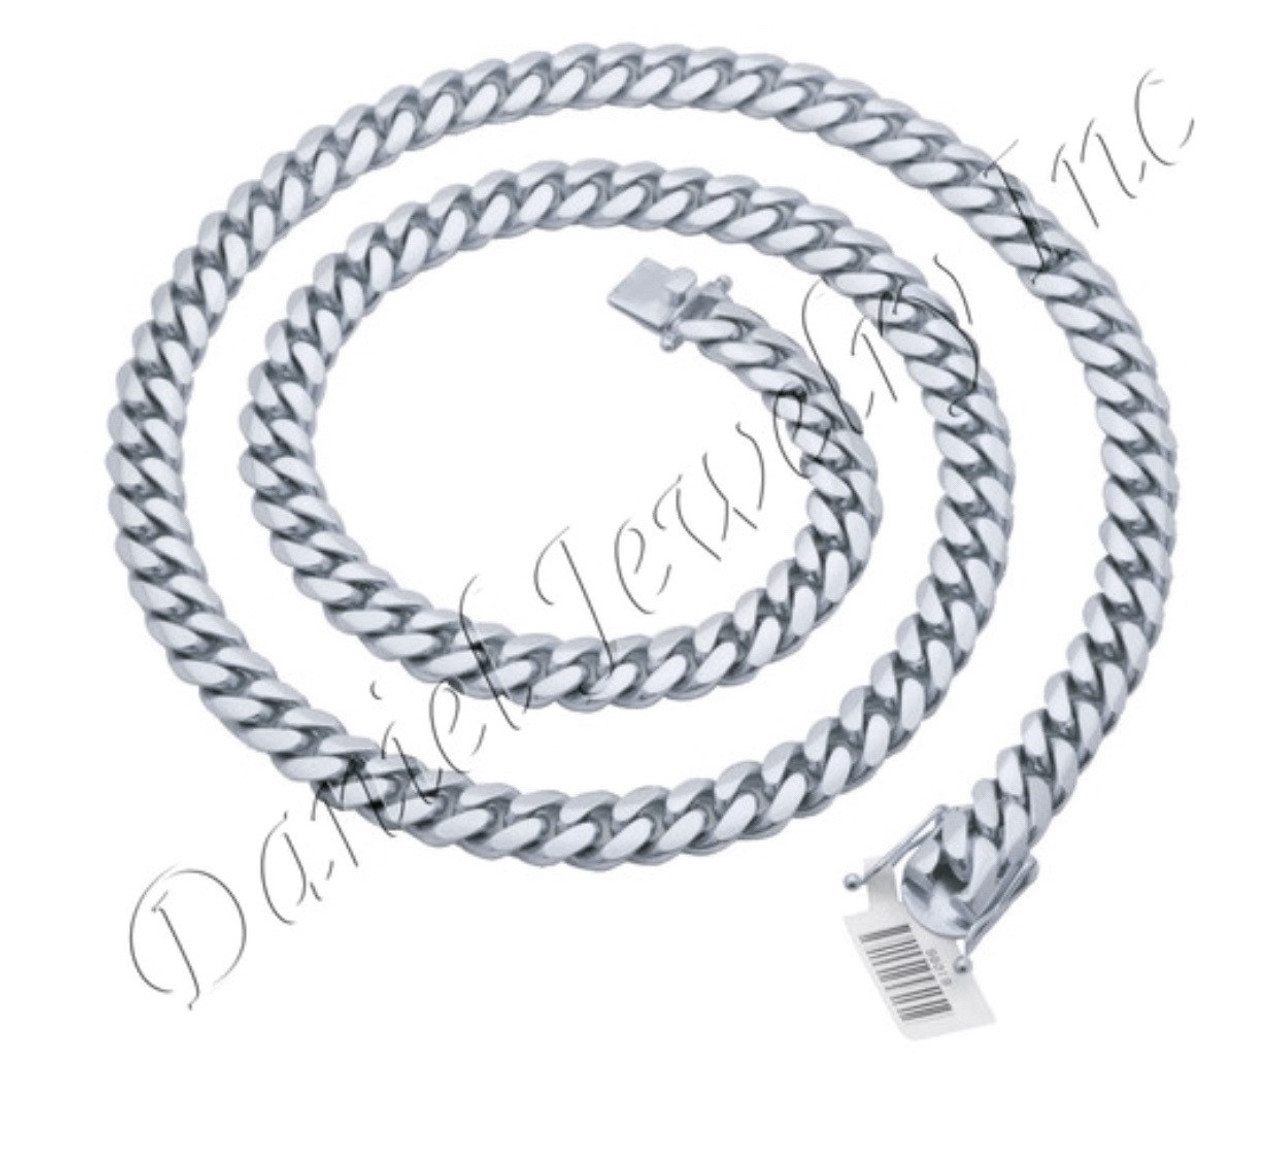 Dankadi Italy Design Solid 925 Sterling Silver Miami Cuban Link Chain Men's Necklace - Box Lock Cuban Link 10 mm 22-24-26 Inches Jewelry Gift